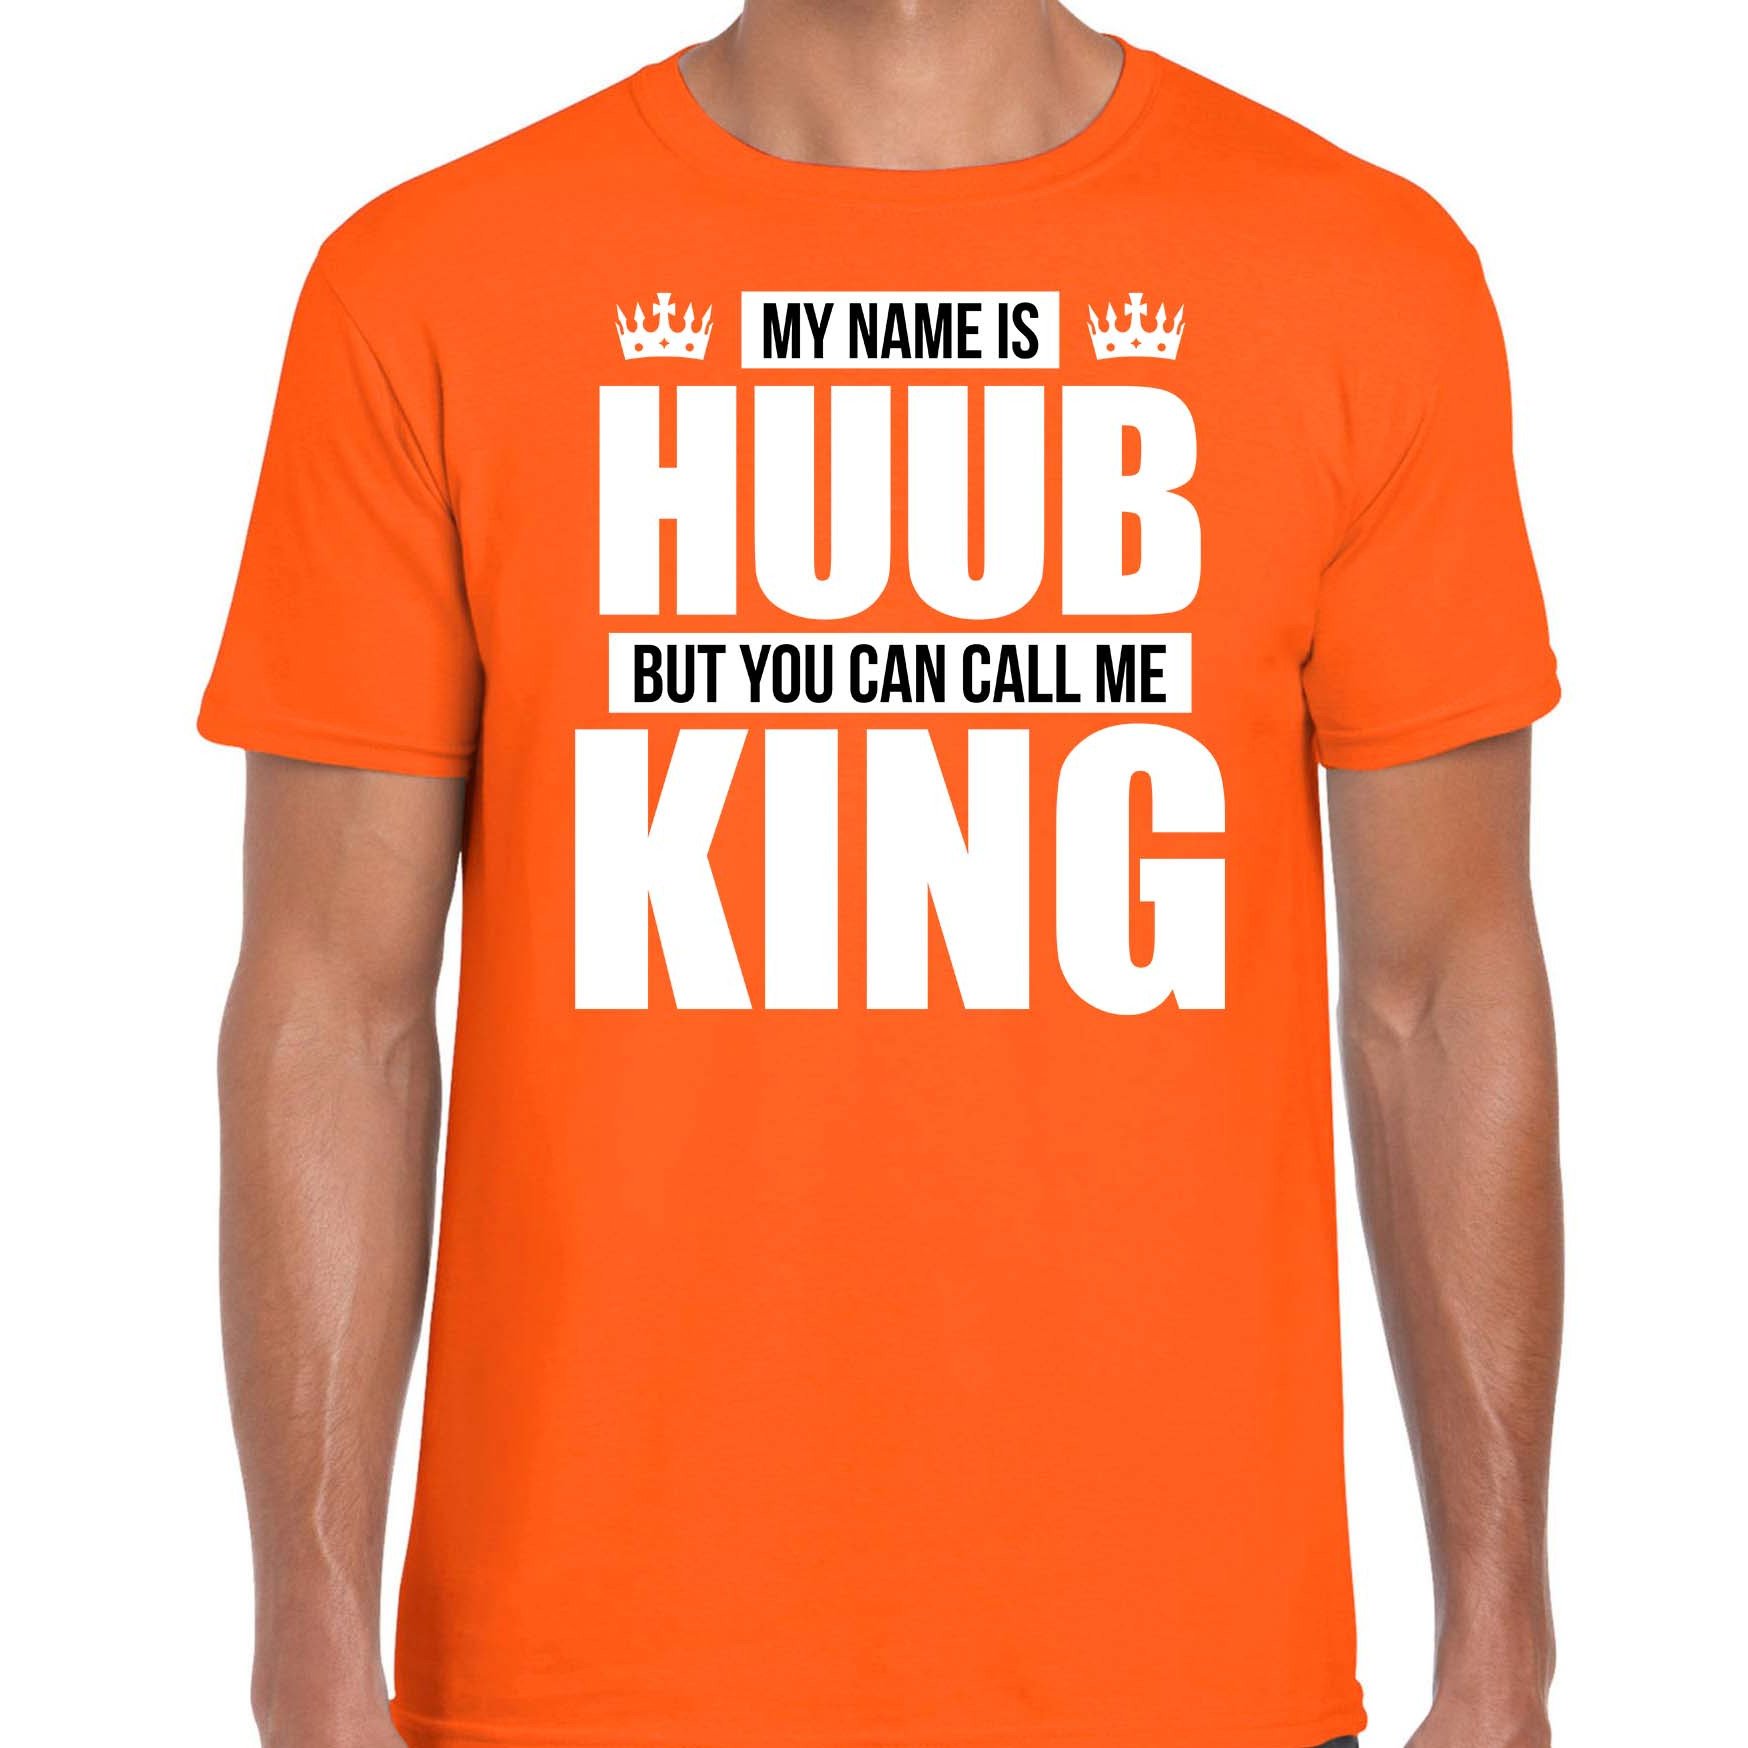 Naam cadeau t-shirt my name is Huub but you can call me King oranje voor heren